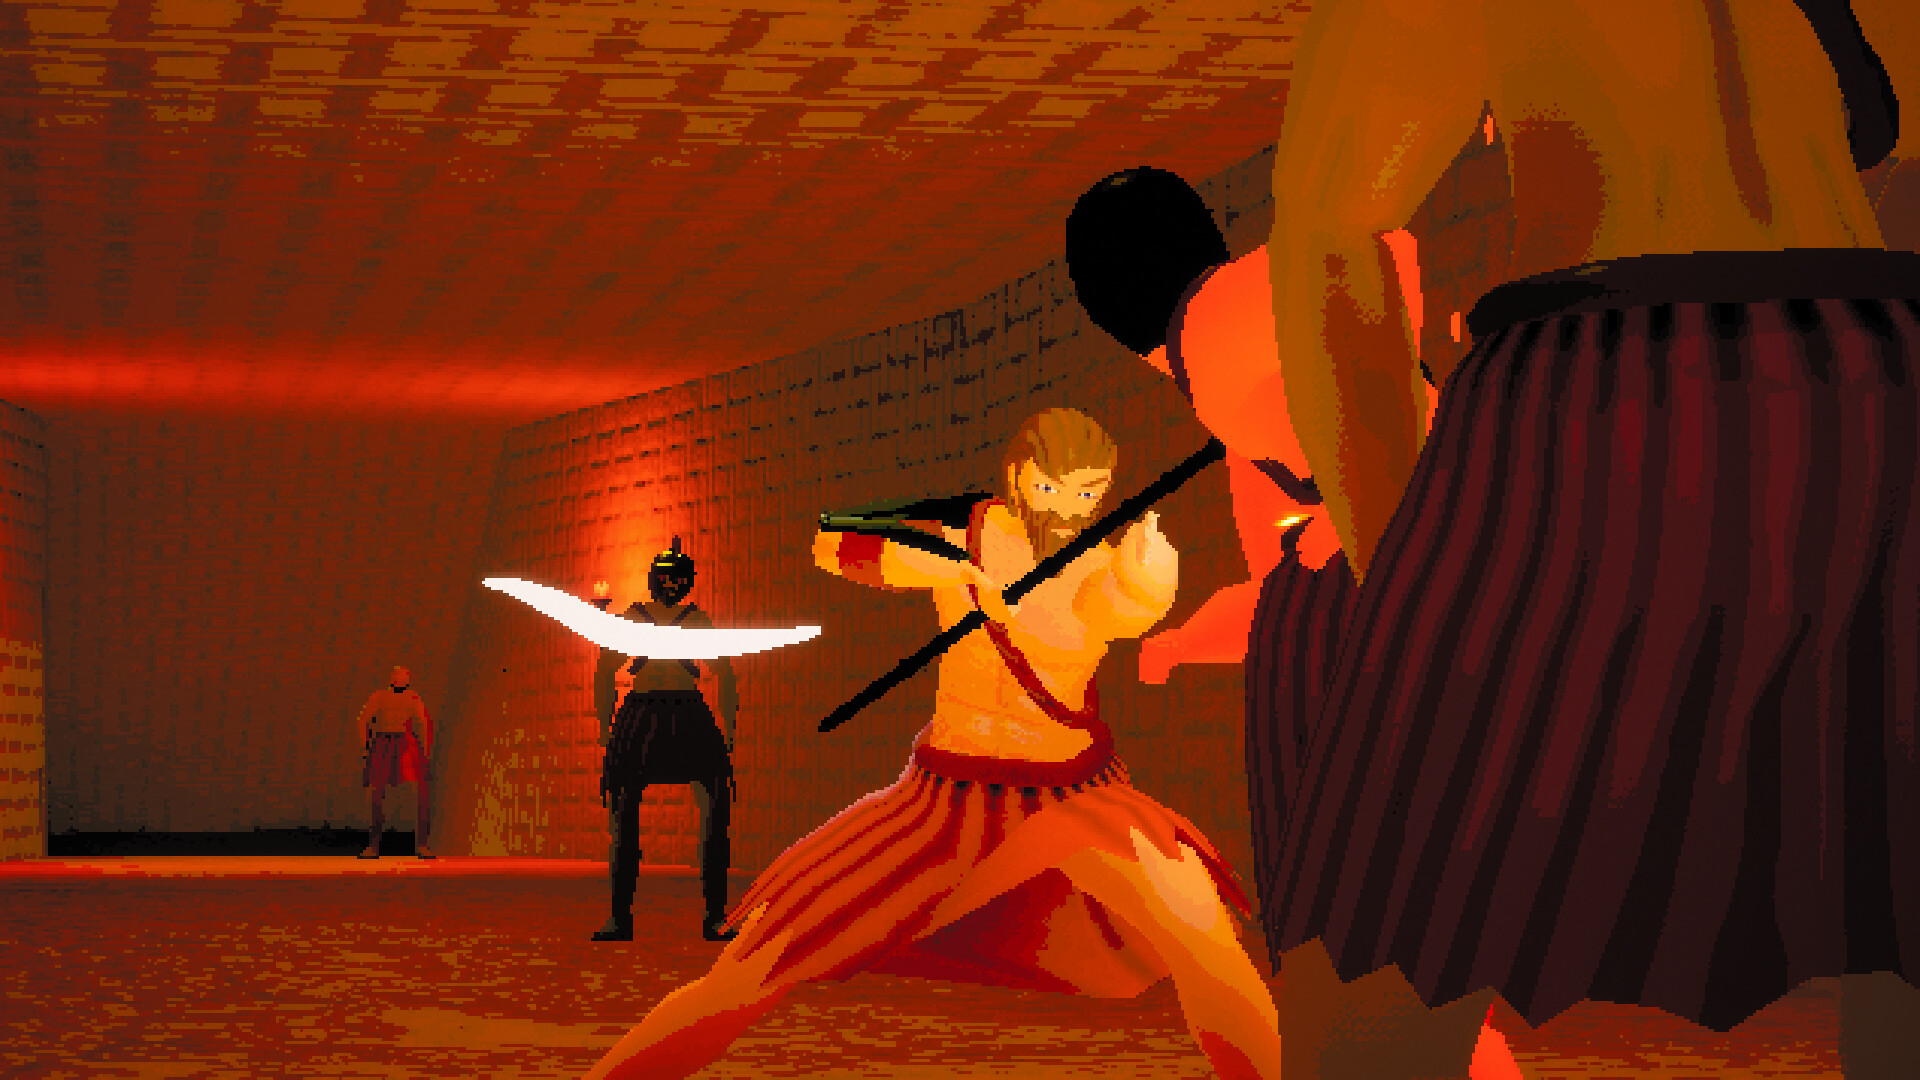 A player trying to fight off enemies in a low lit room. Image is from game Slay the Minotaur.